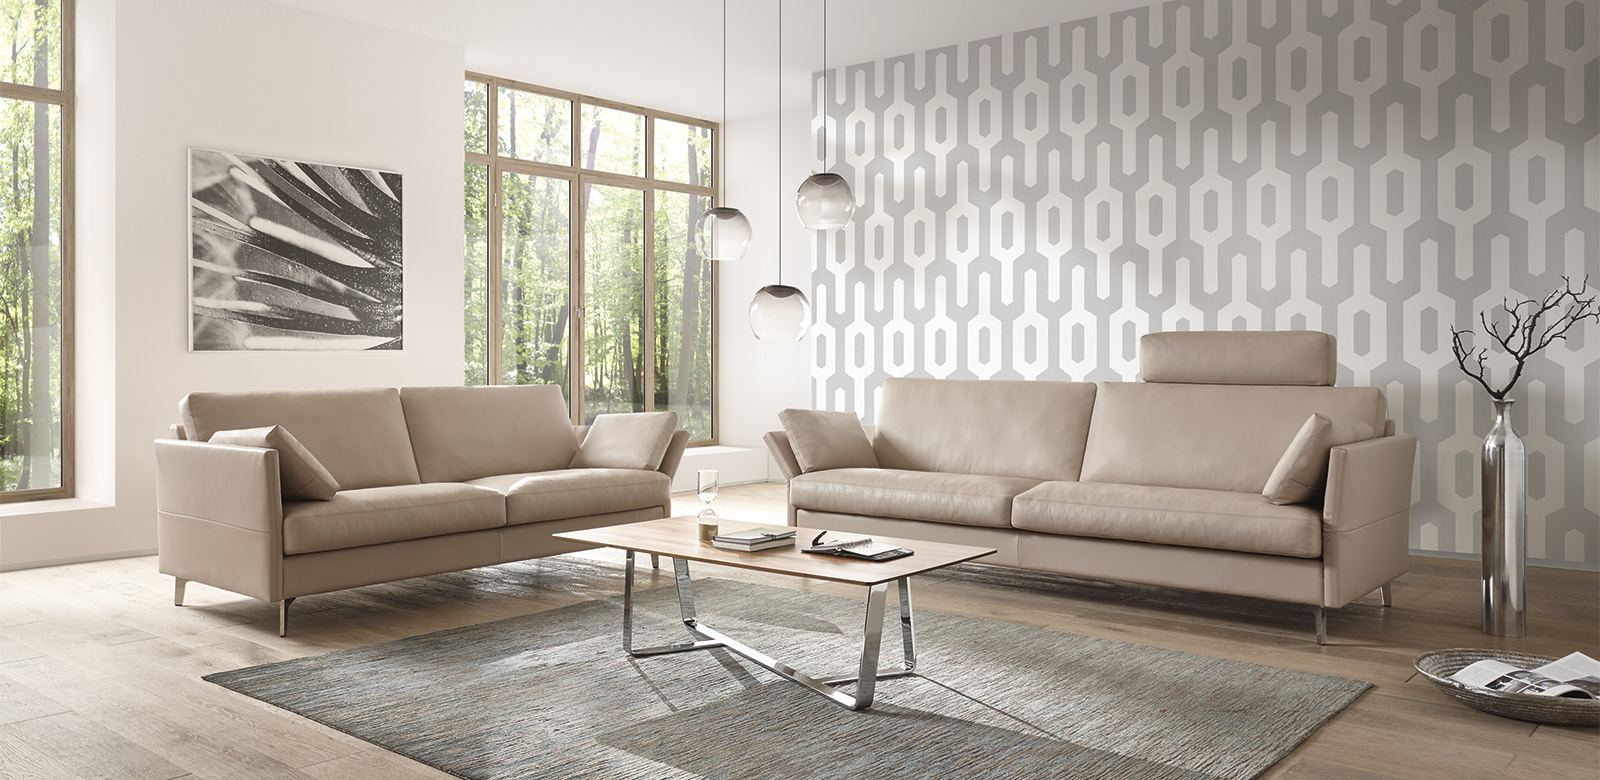 Two CL990 sofa in beige leather with headrest, armrest cushions and adjustable armrests in large living room with symmetrical patterned wall